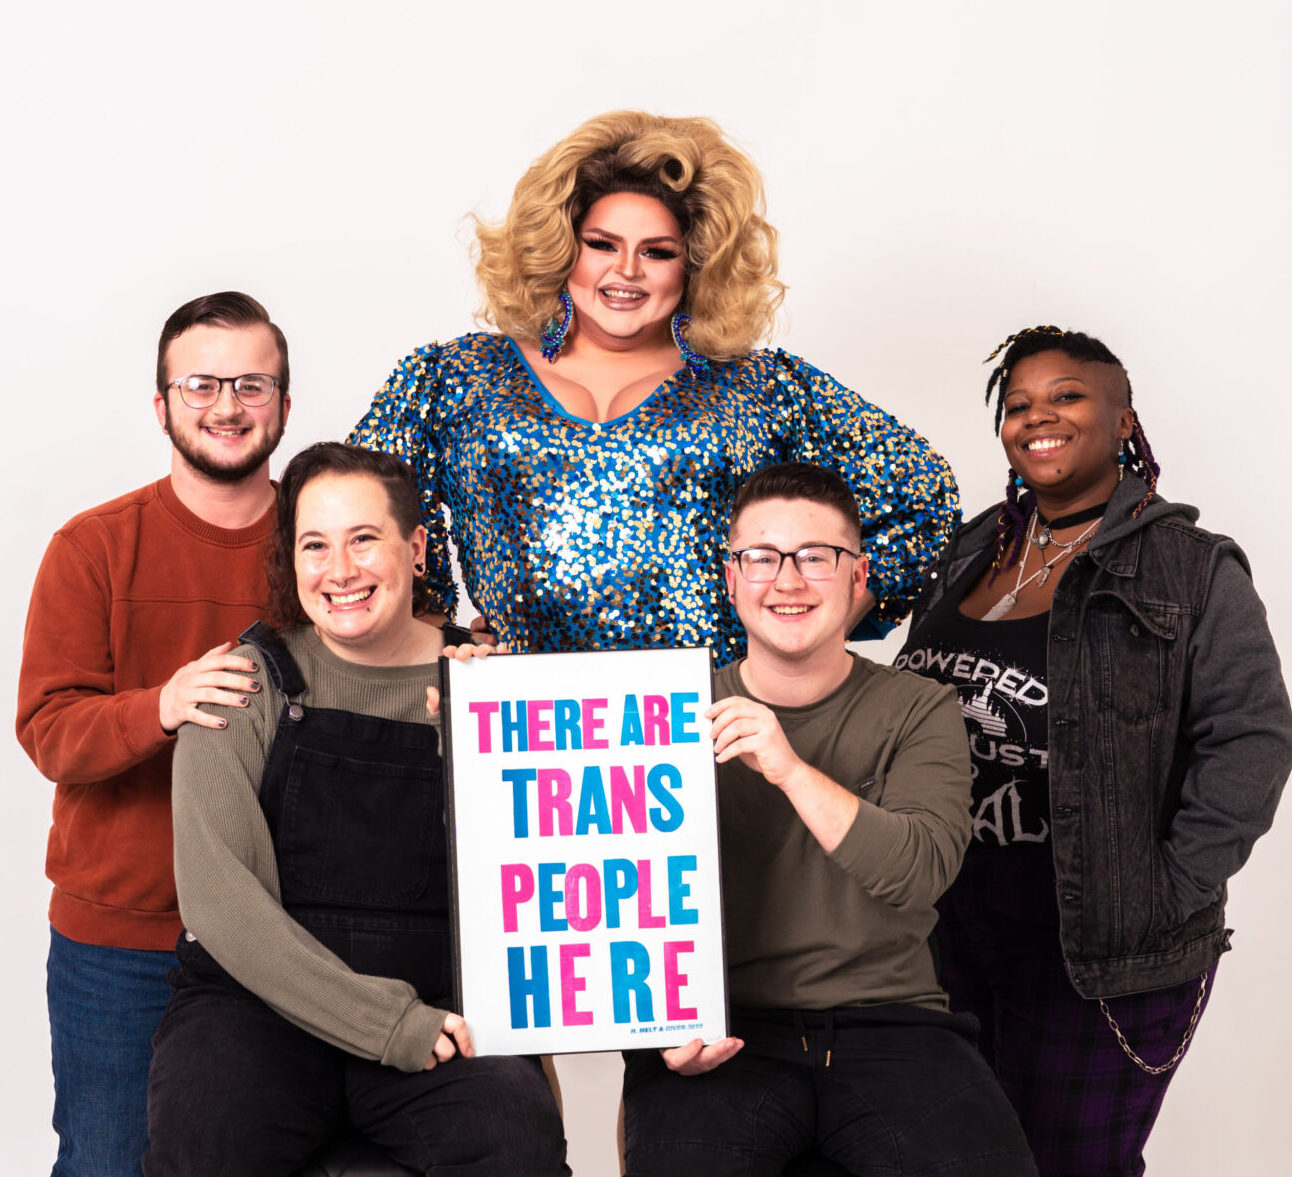 A group of LGBTQ people holding a poster of H. Melt's quote: "There are trans people here."